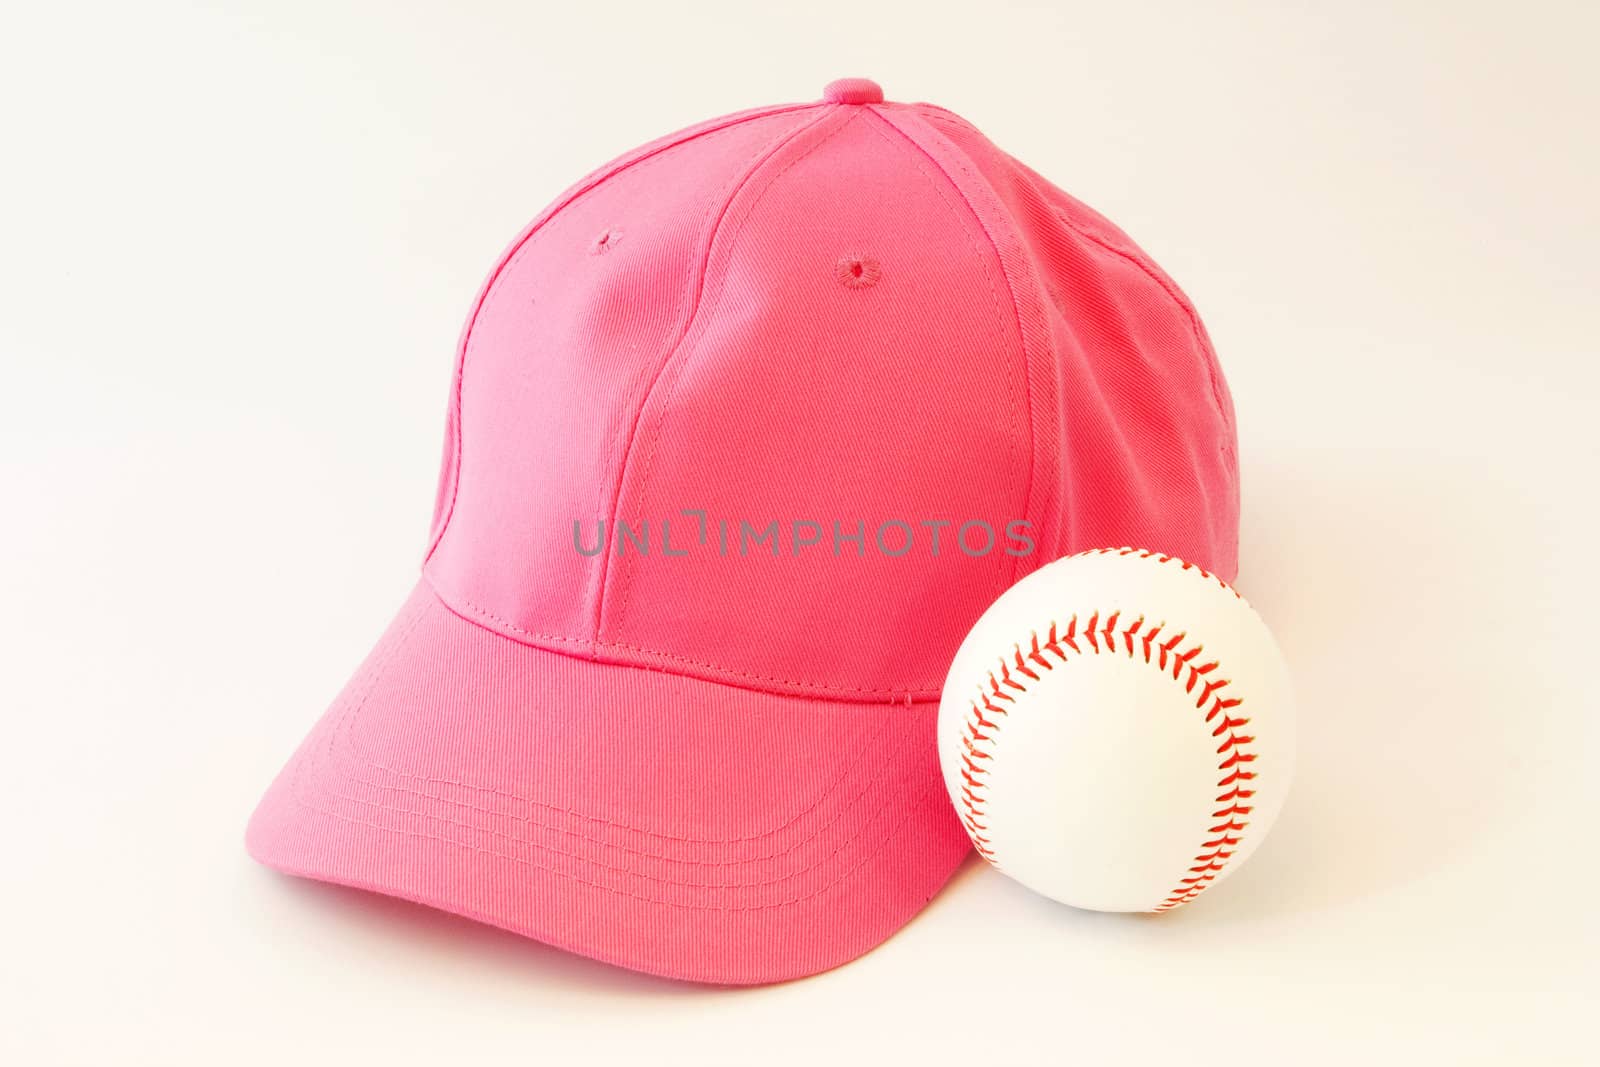 Pink baseball cap next to baseball reflects a feminist involvement in our national pastime;